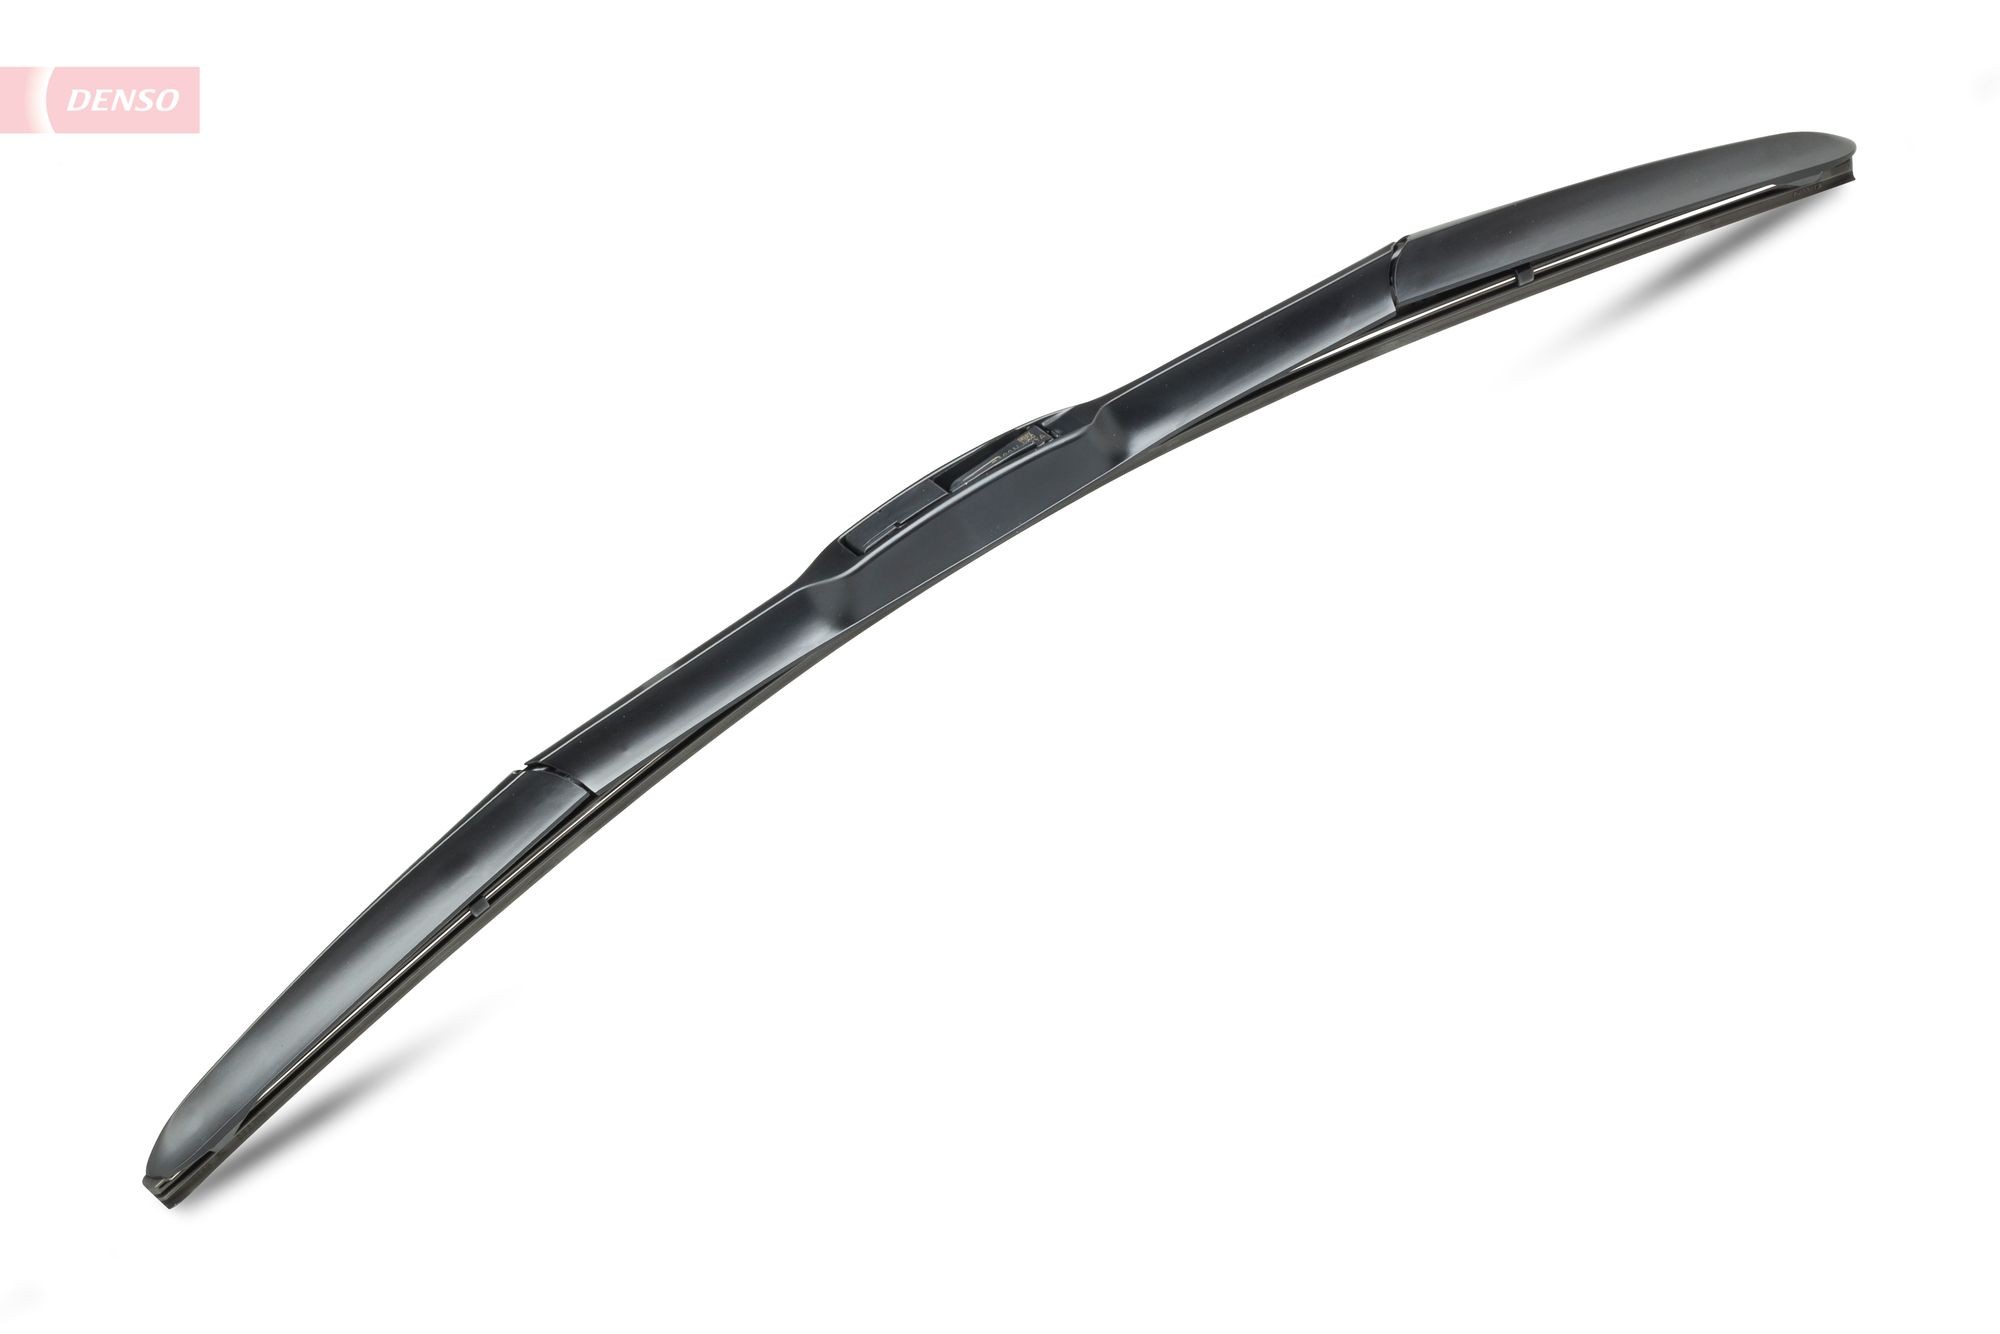 Original DENSO Windshield wipers DU-053L for VW CADDY